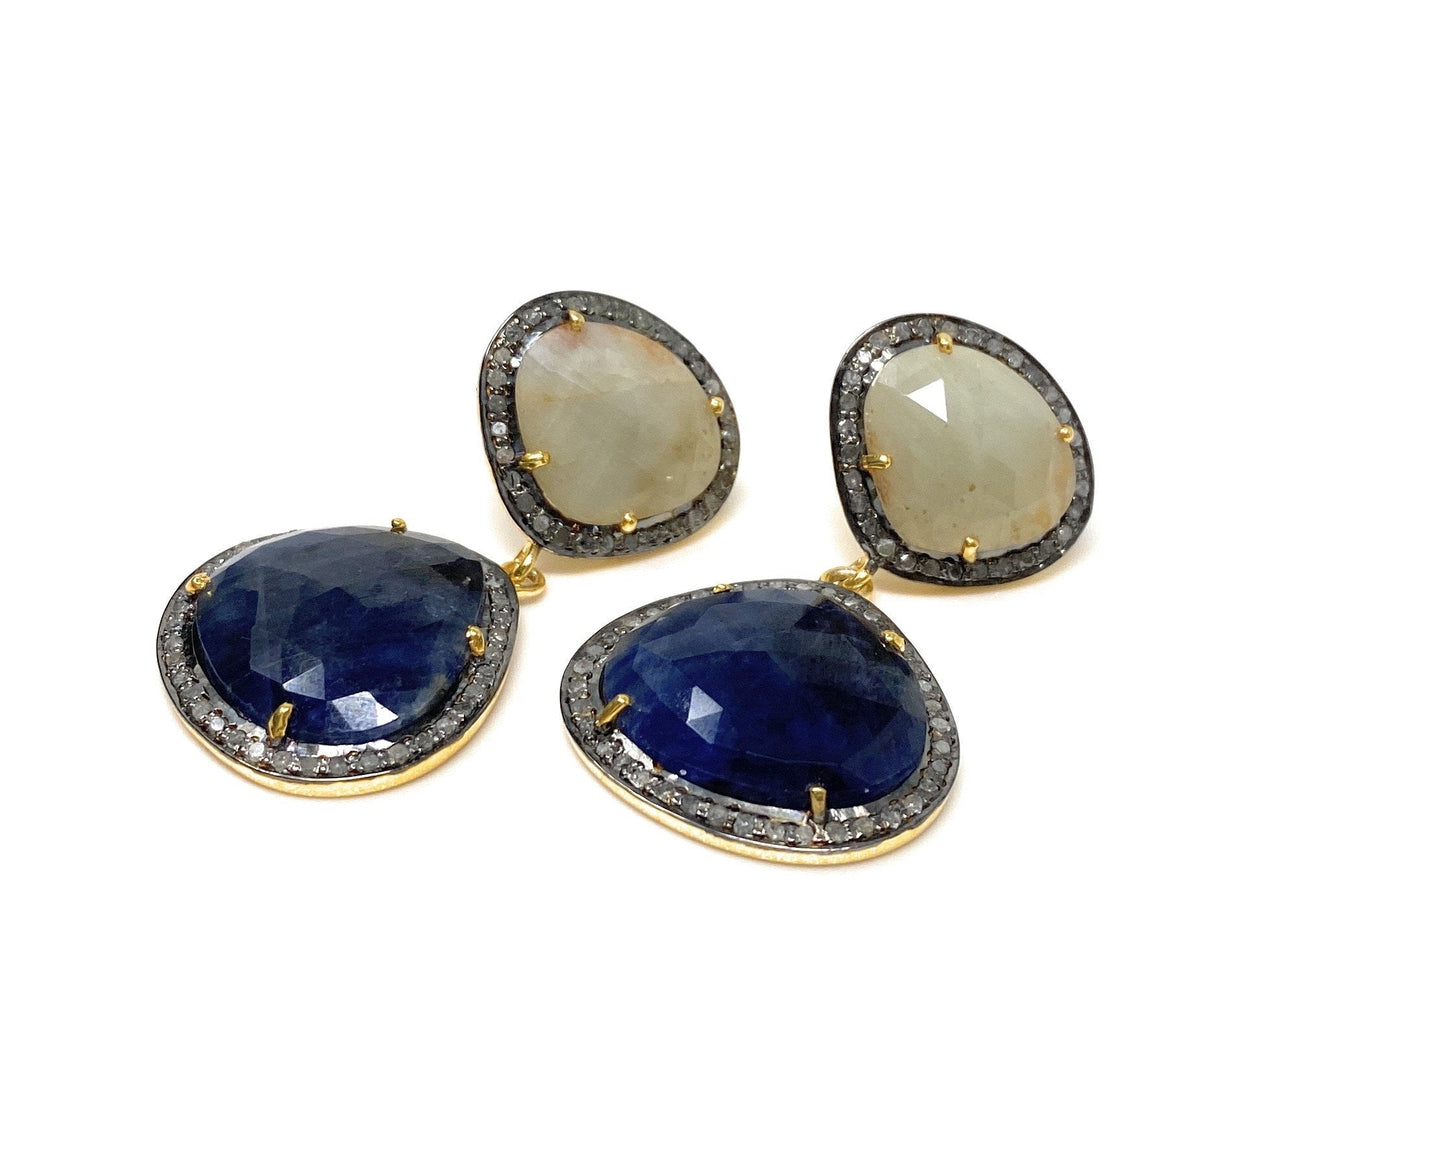 Rare Blue and Off White Sapphire Pave Diamond Earrings, Genuine Fancy